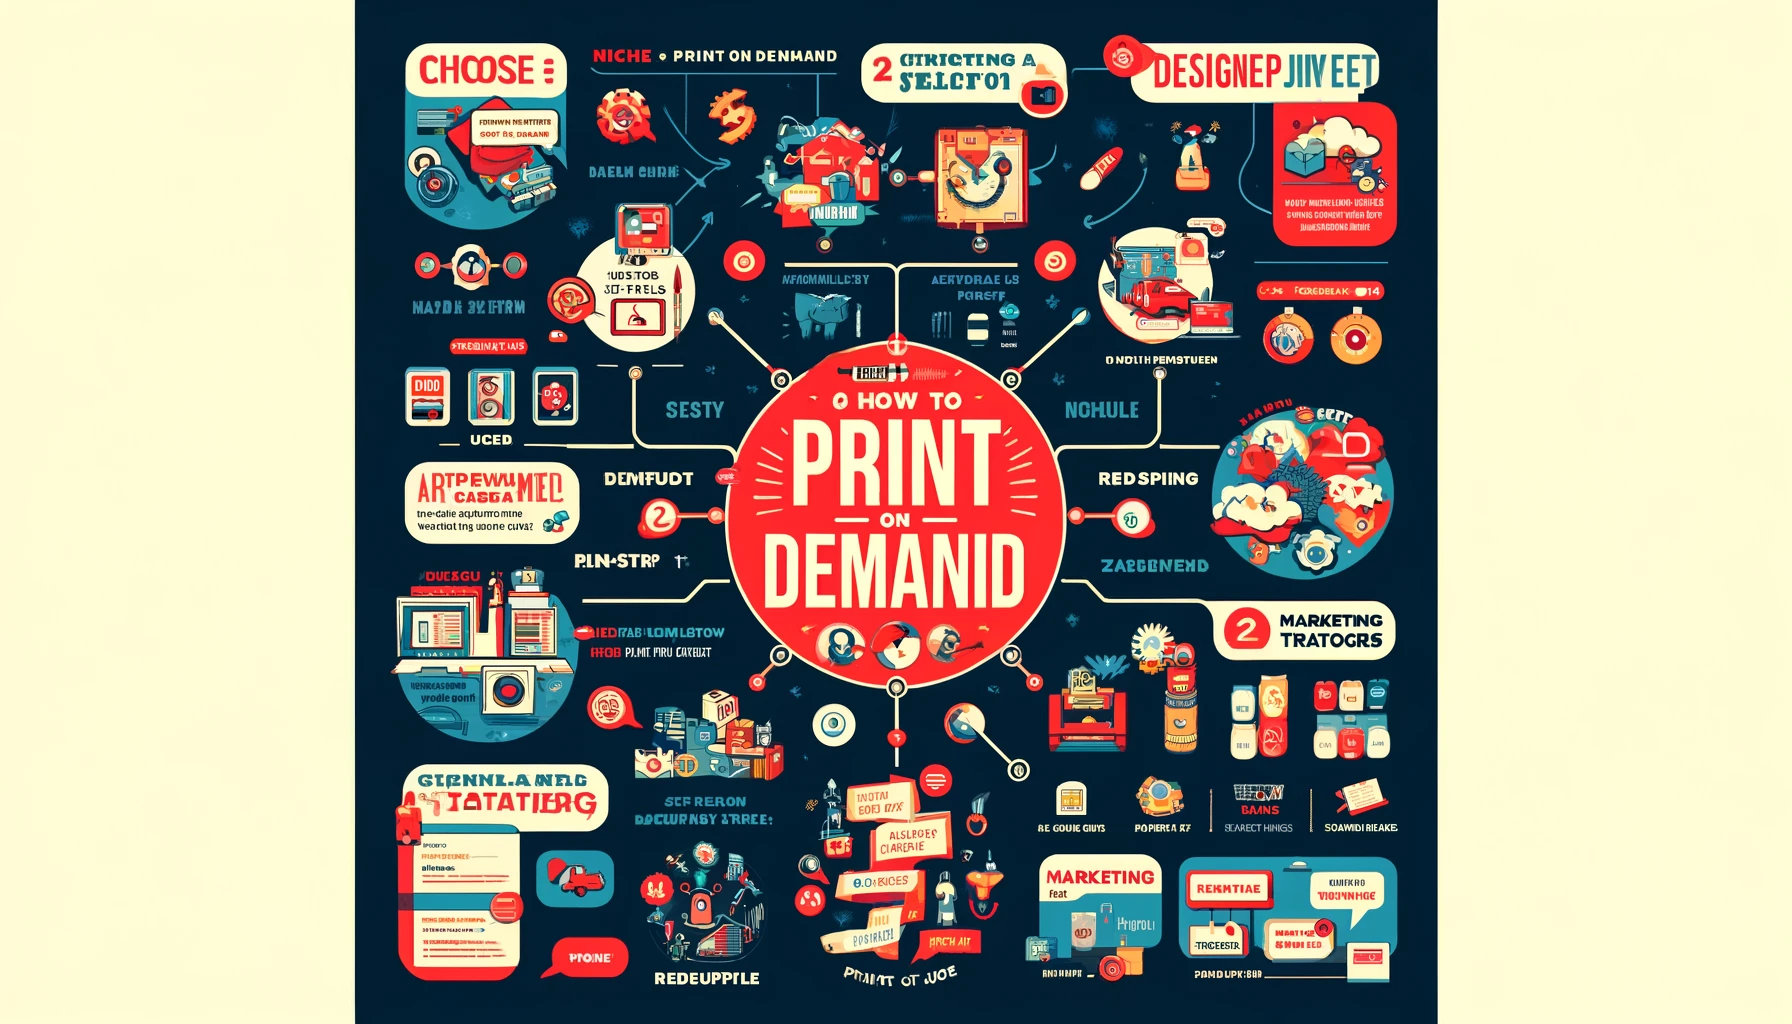 Print on Demand Guide